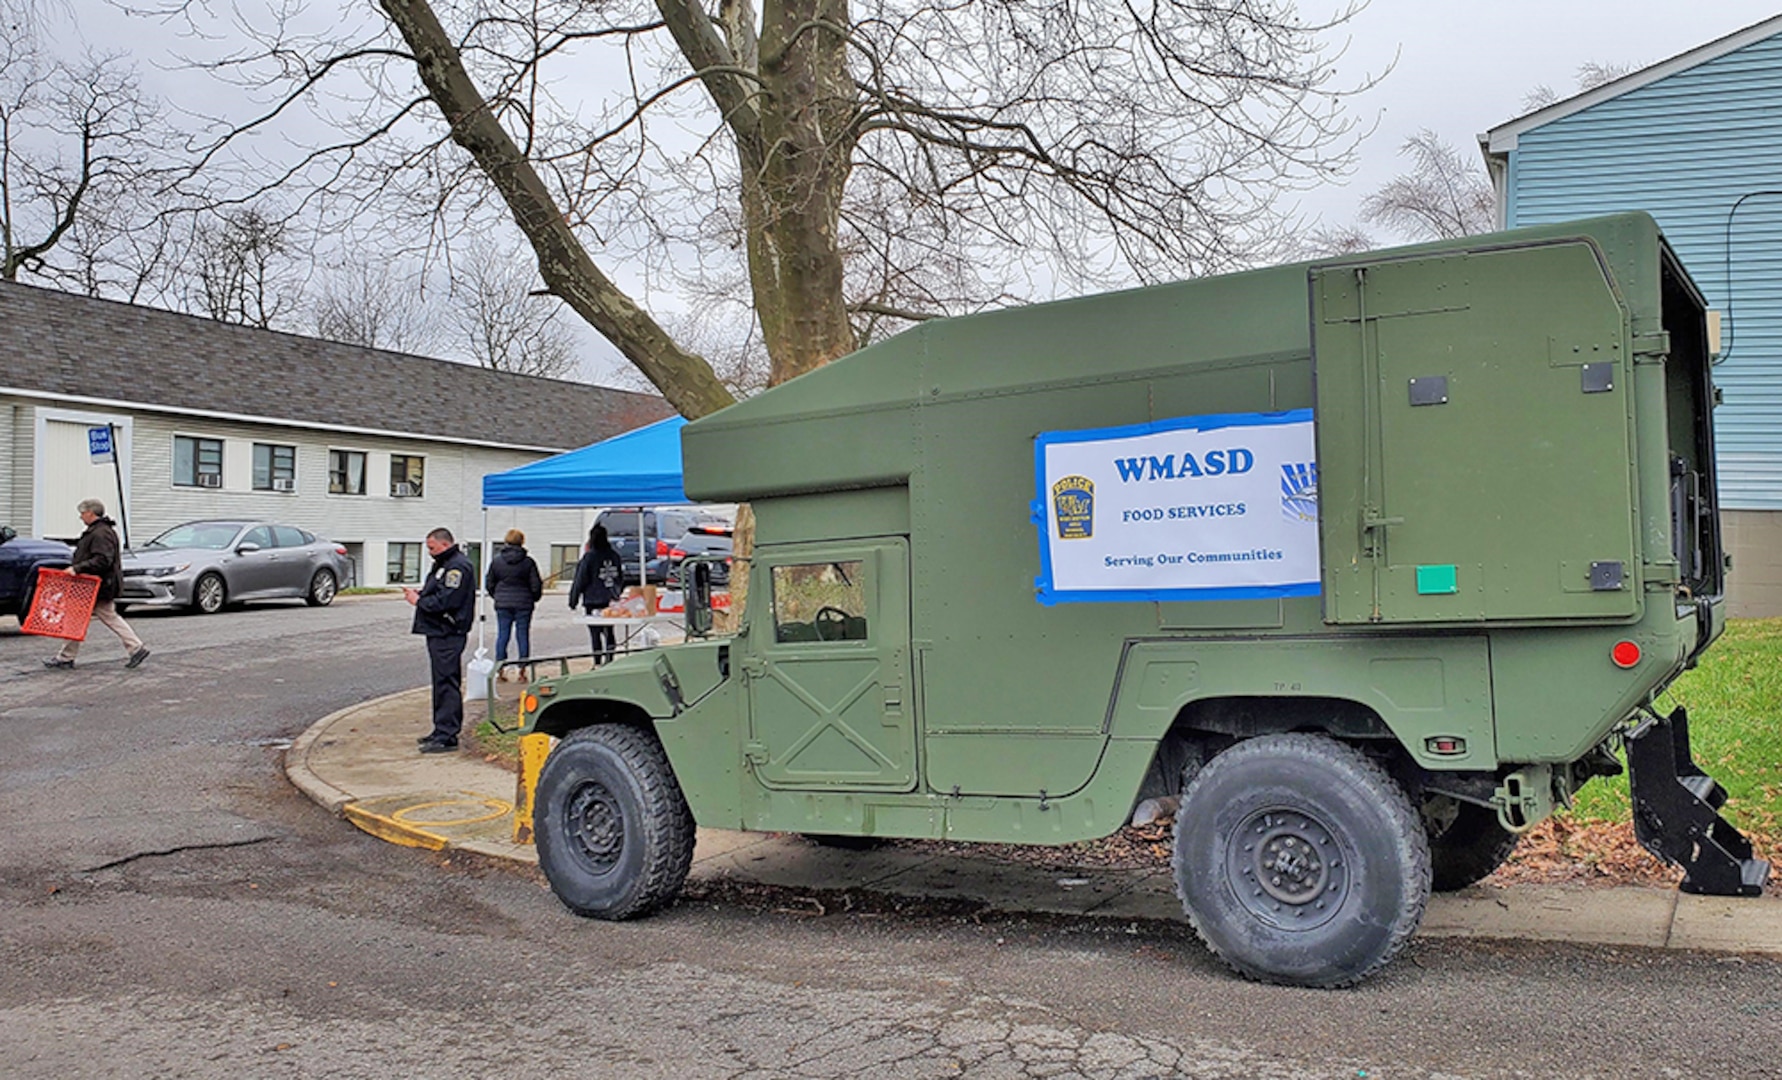 A former military ambulance is parked on a street corner food donation location.